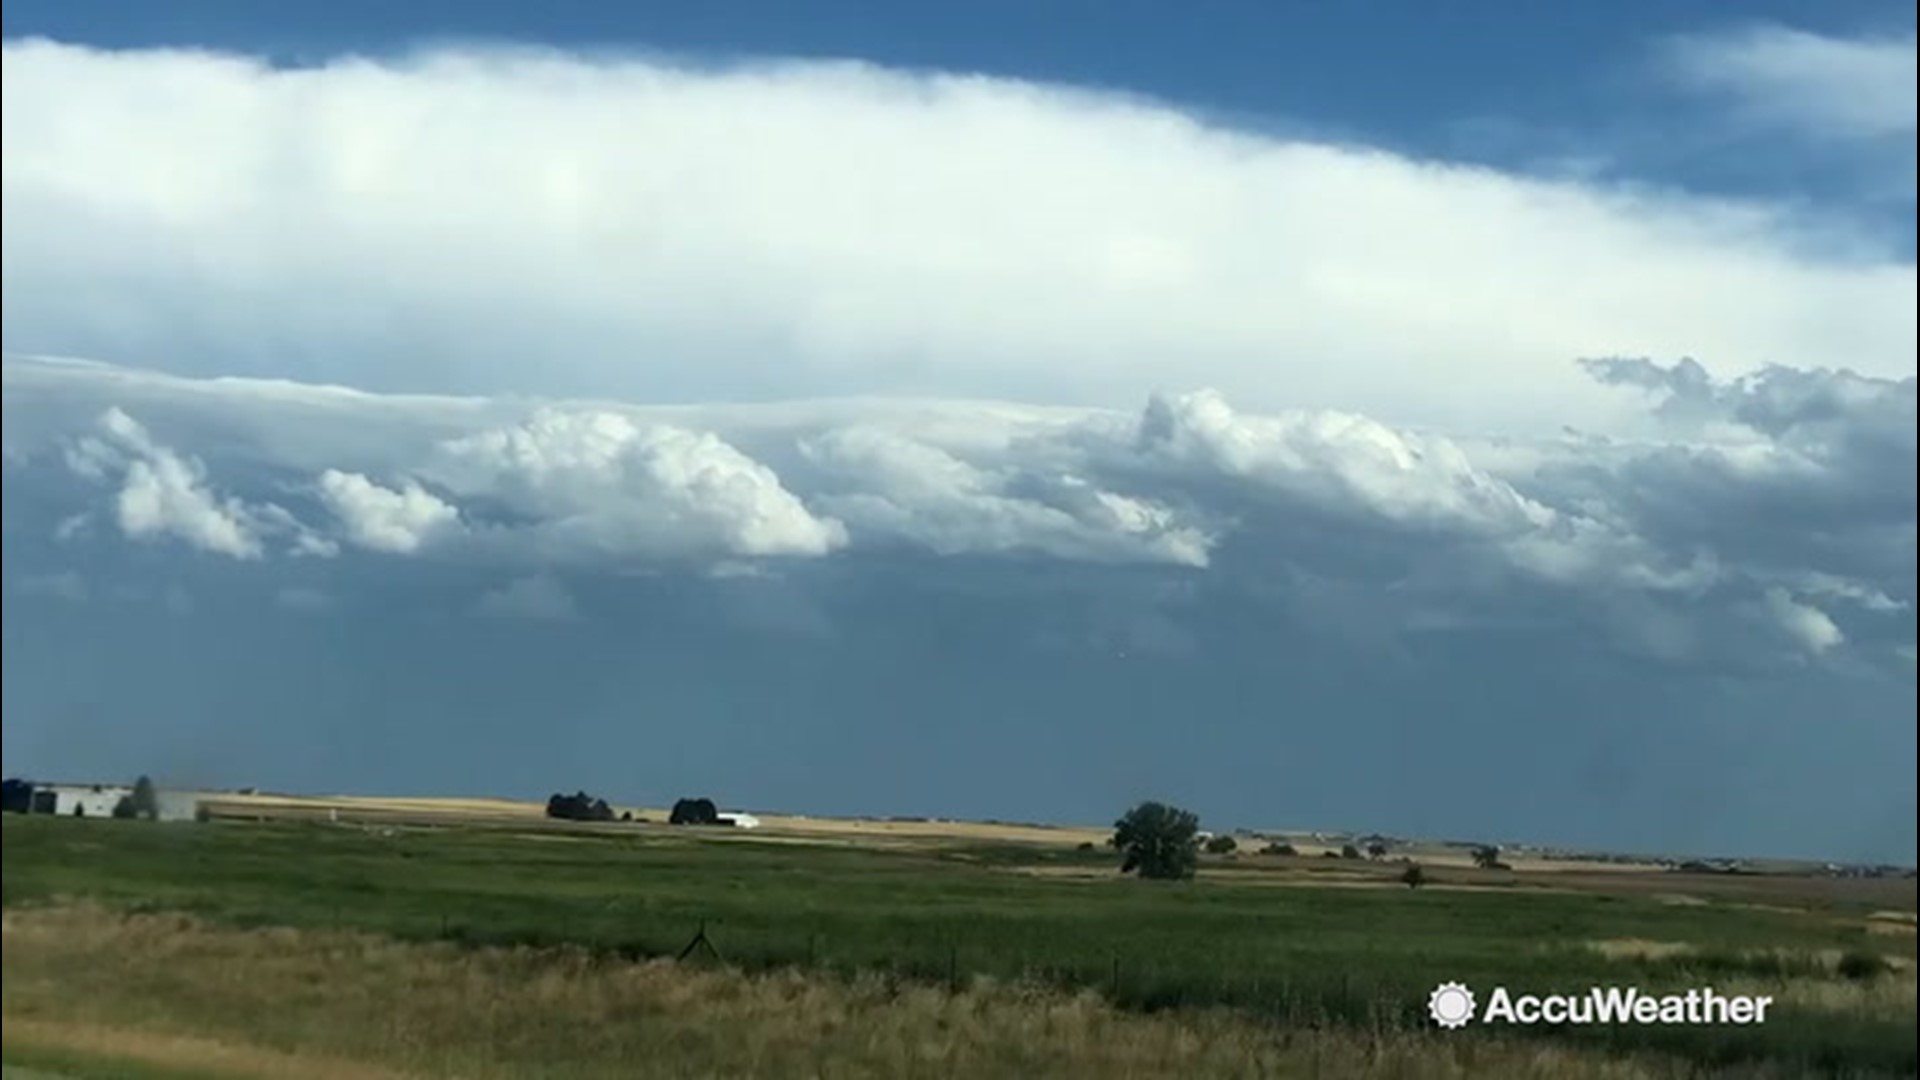 On August 16, Reed Timmer spotted massive storm clouds near Limon, Colorado. Widespread rain would hit the state later in the day.